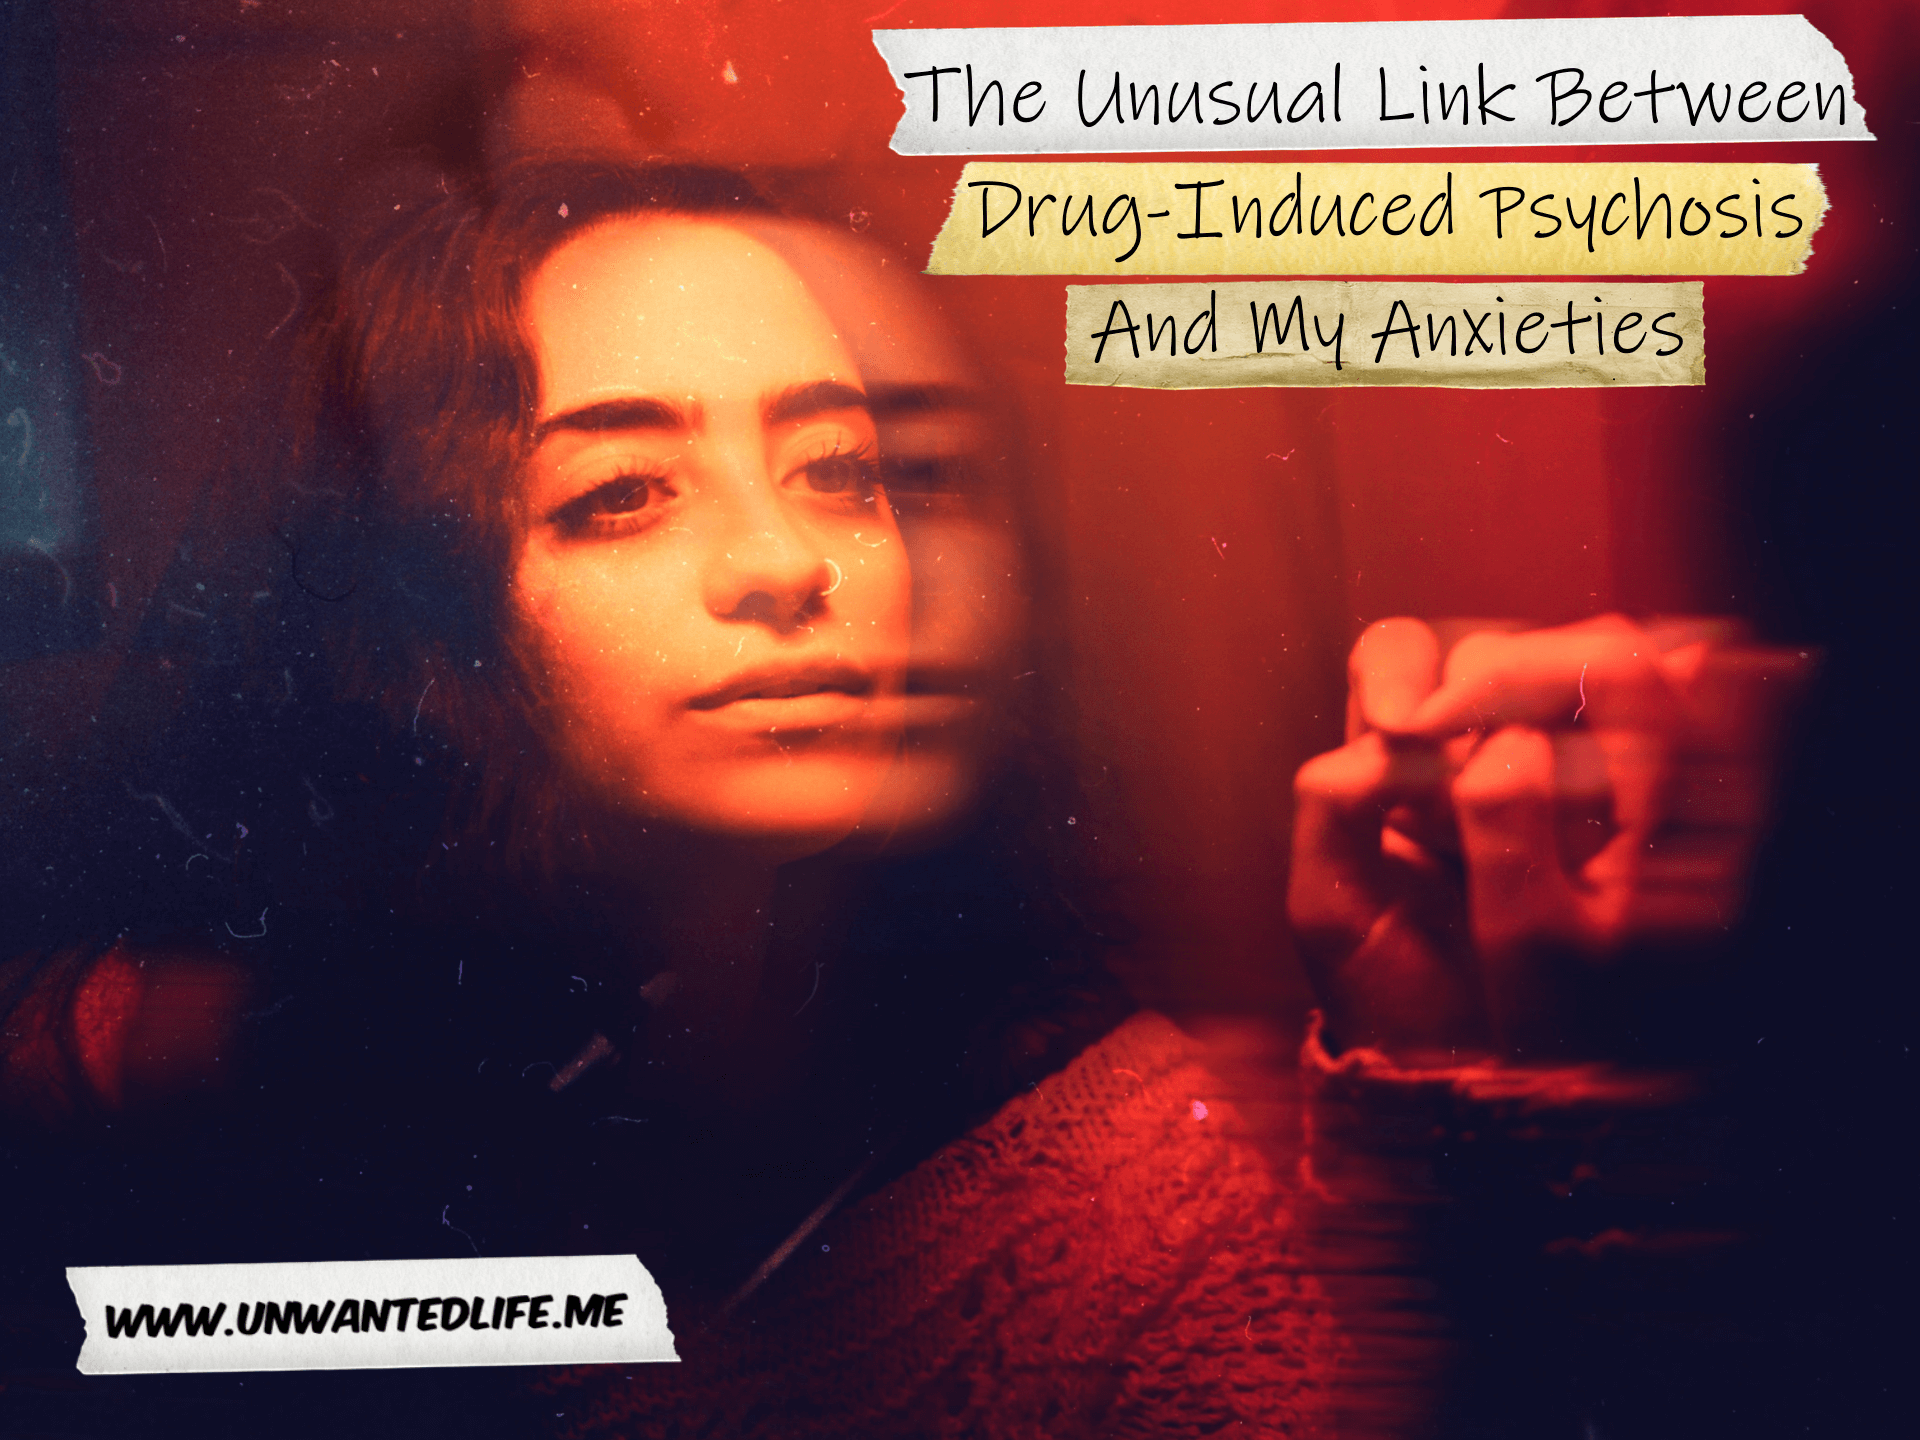 A distorted picture of a woman looking into a mirror to represent psychosis with the title of the article - The Unusual Link Between Drug-Induced Psychosis And My Anxieties - in the top right corner